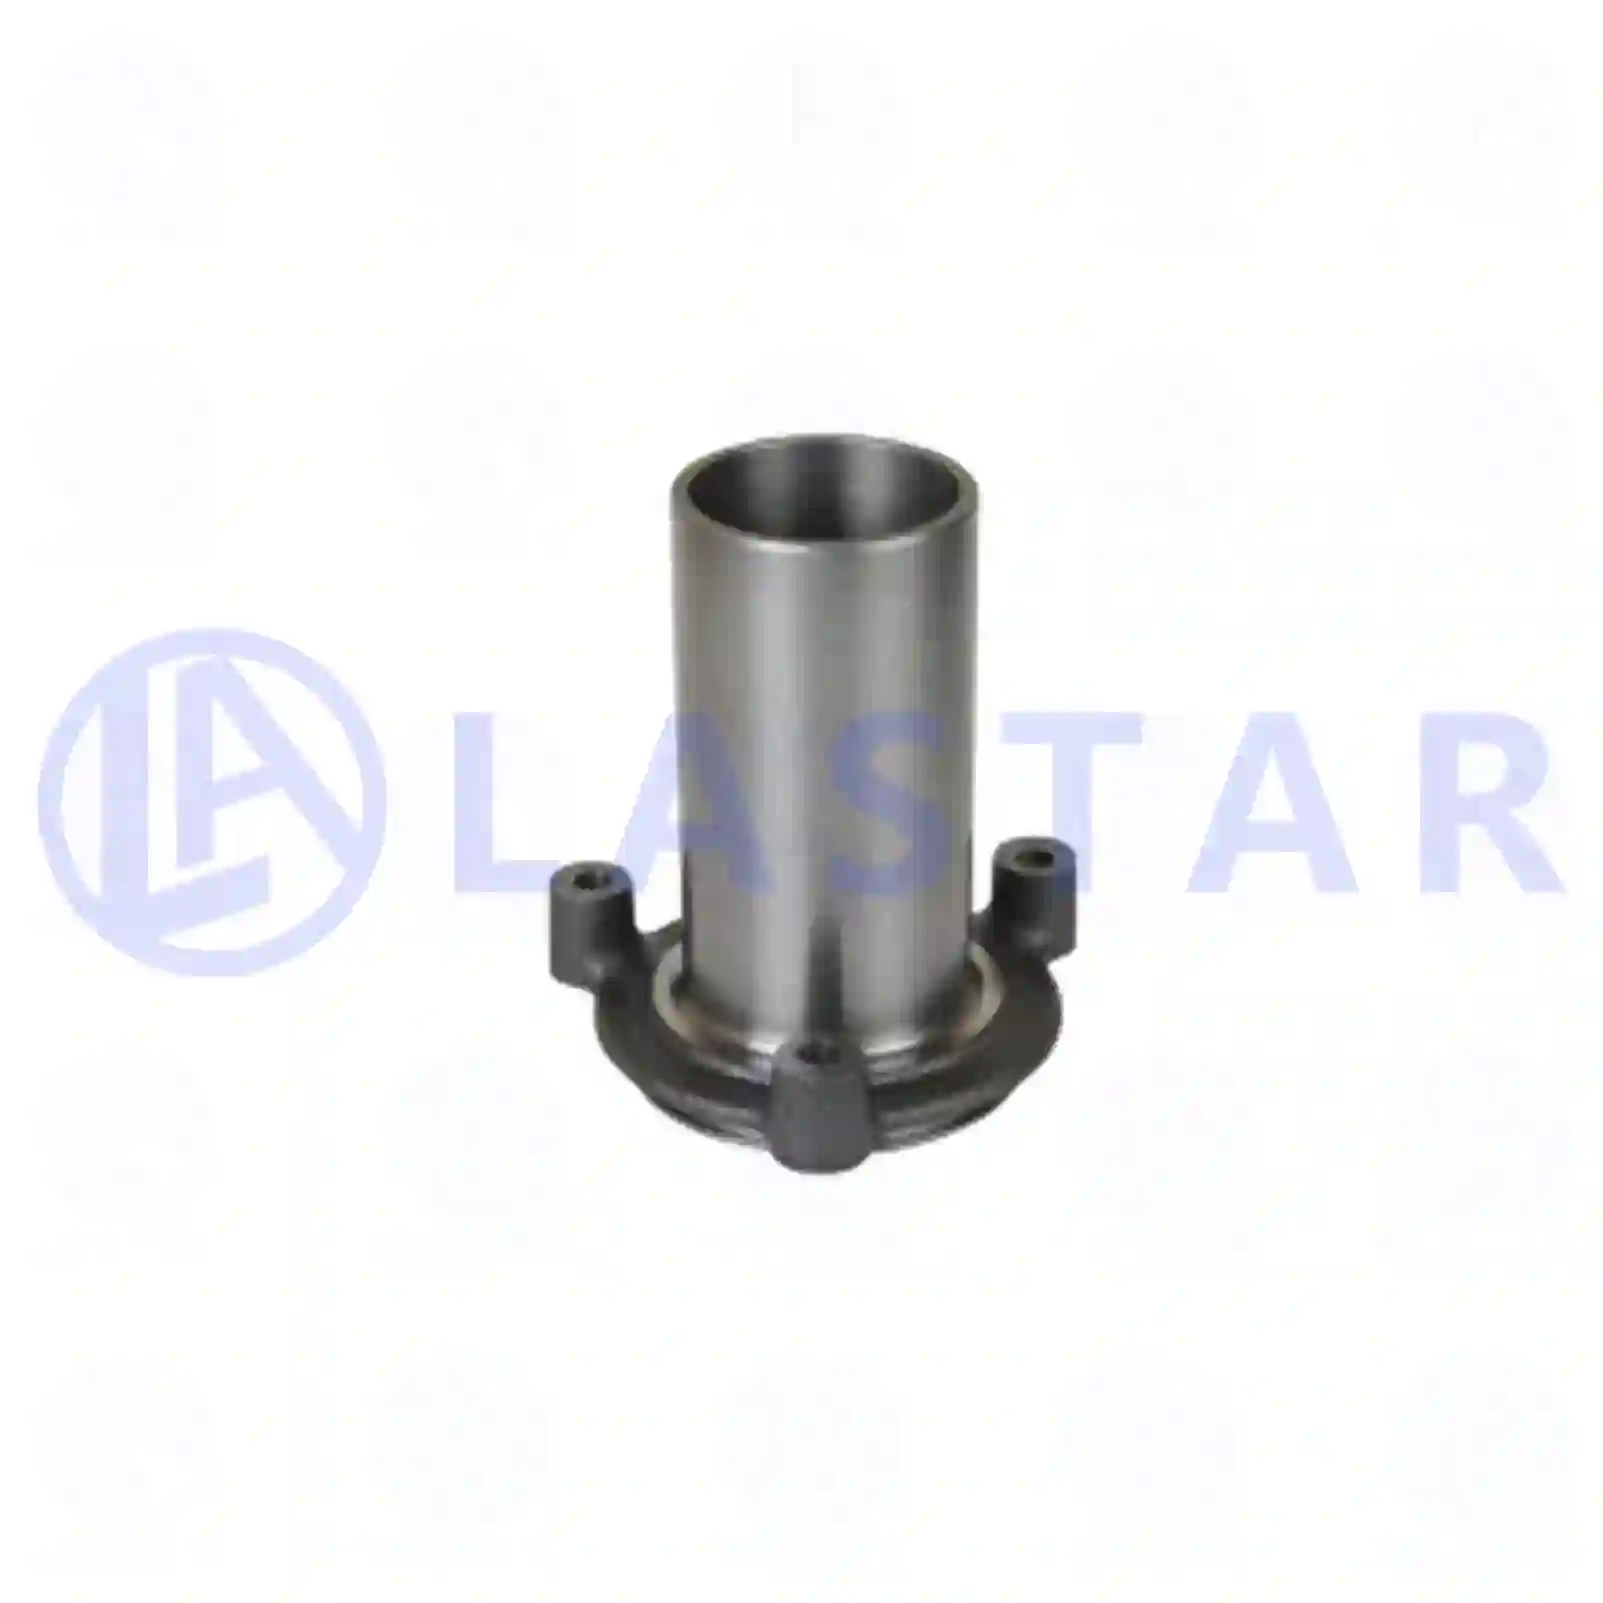  Sleeve, gearbox housing || Lastar Spare Part | Truck Spare Parts, Auotomotive Spare Parts